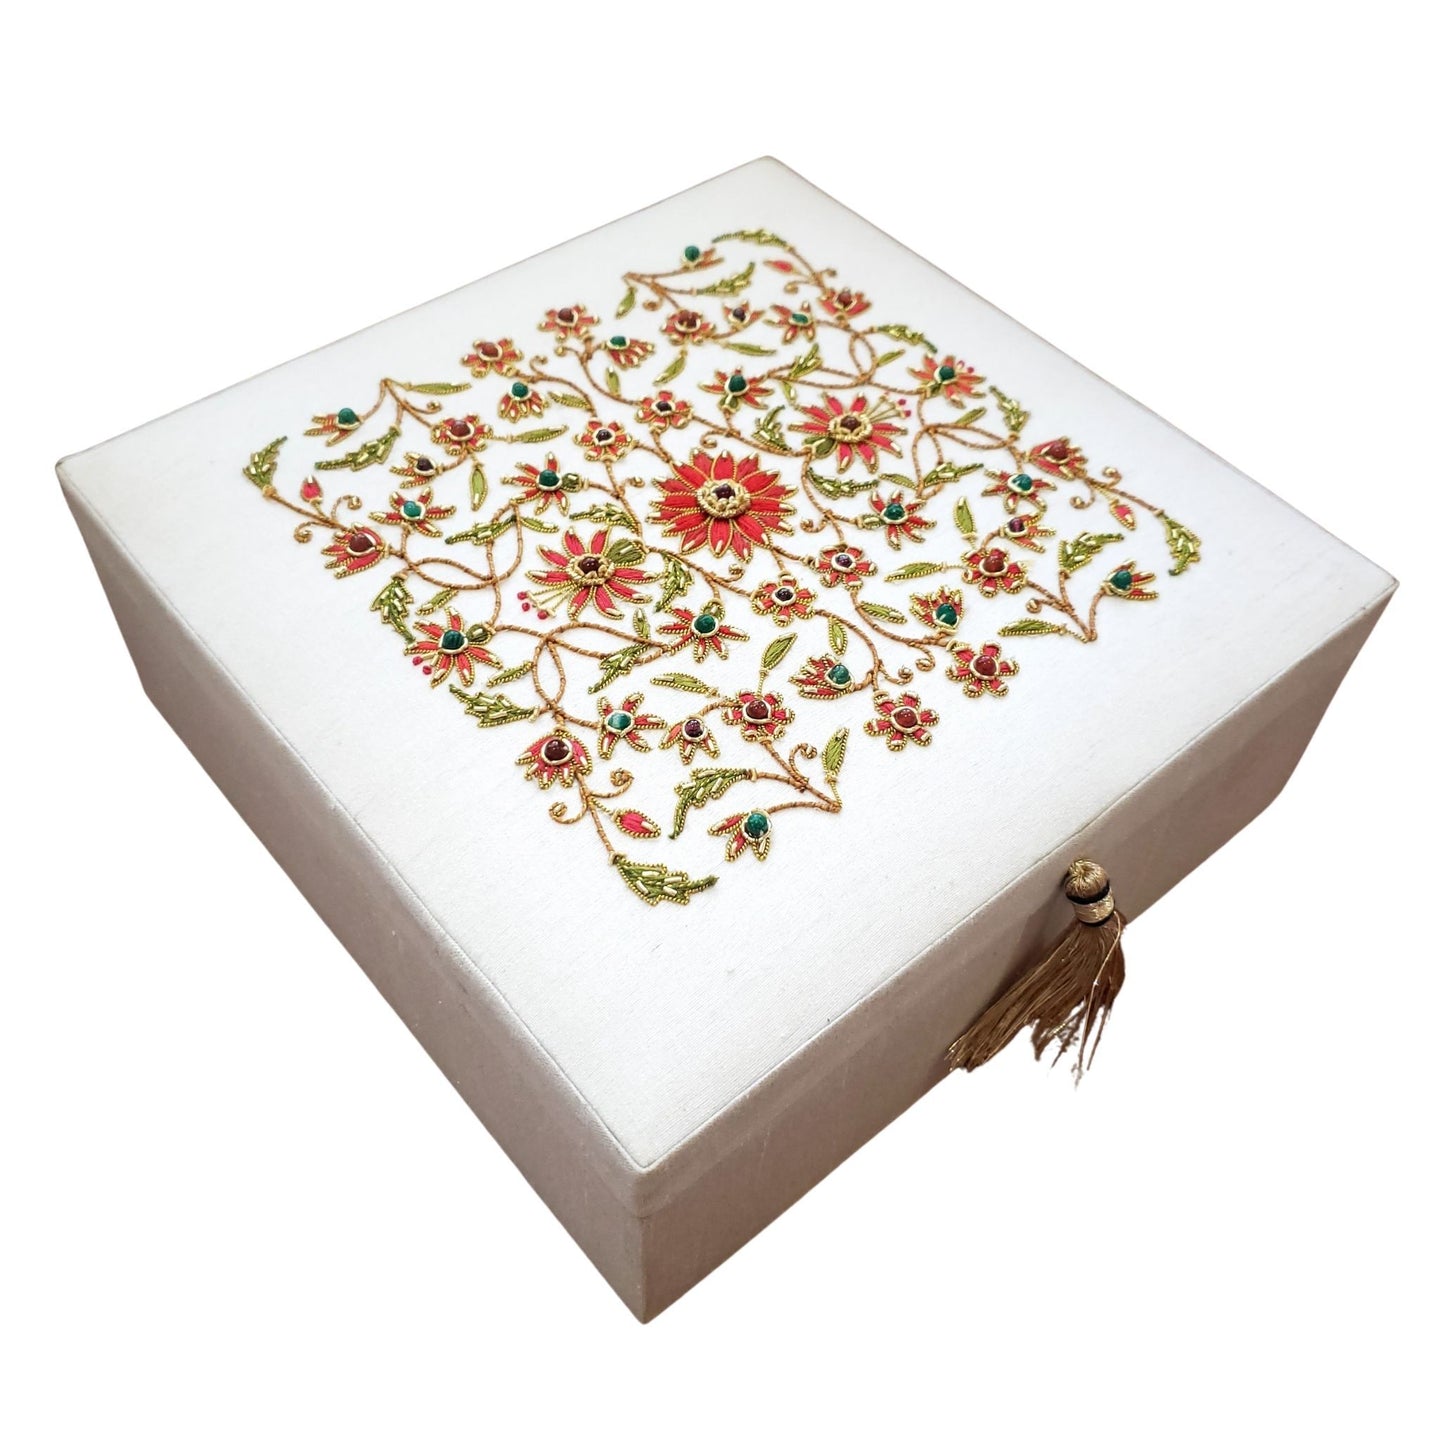 White keepsake box embroidered with red flowers and inlaid with gemstones BoutiqueByMariam.